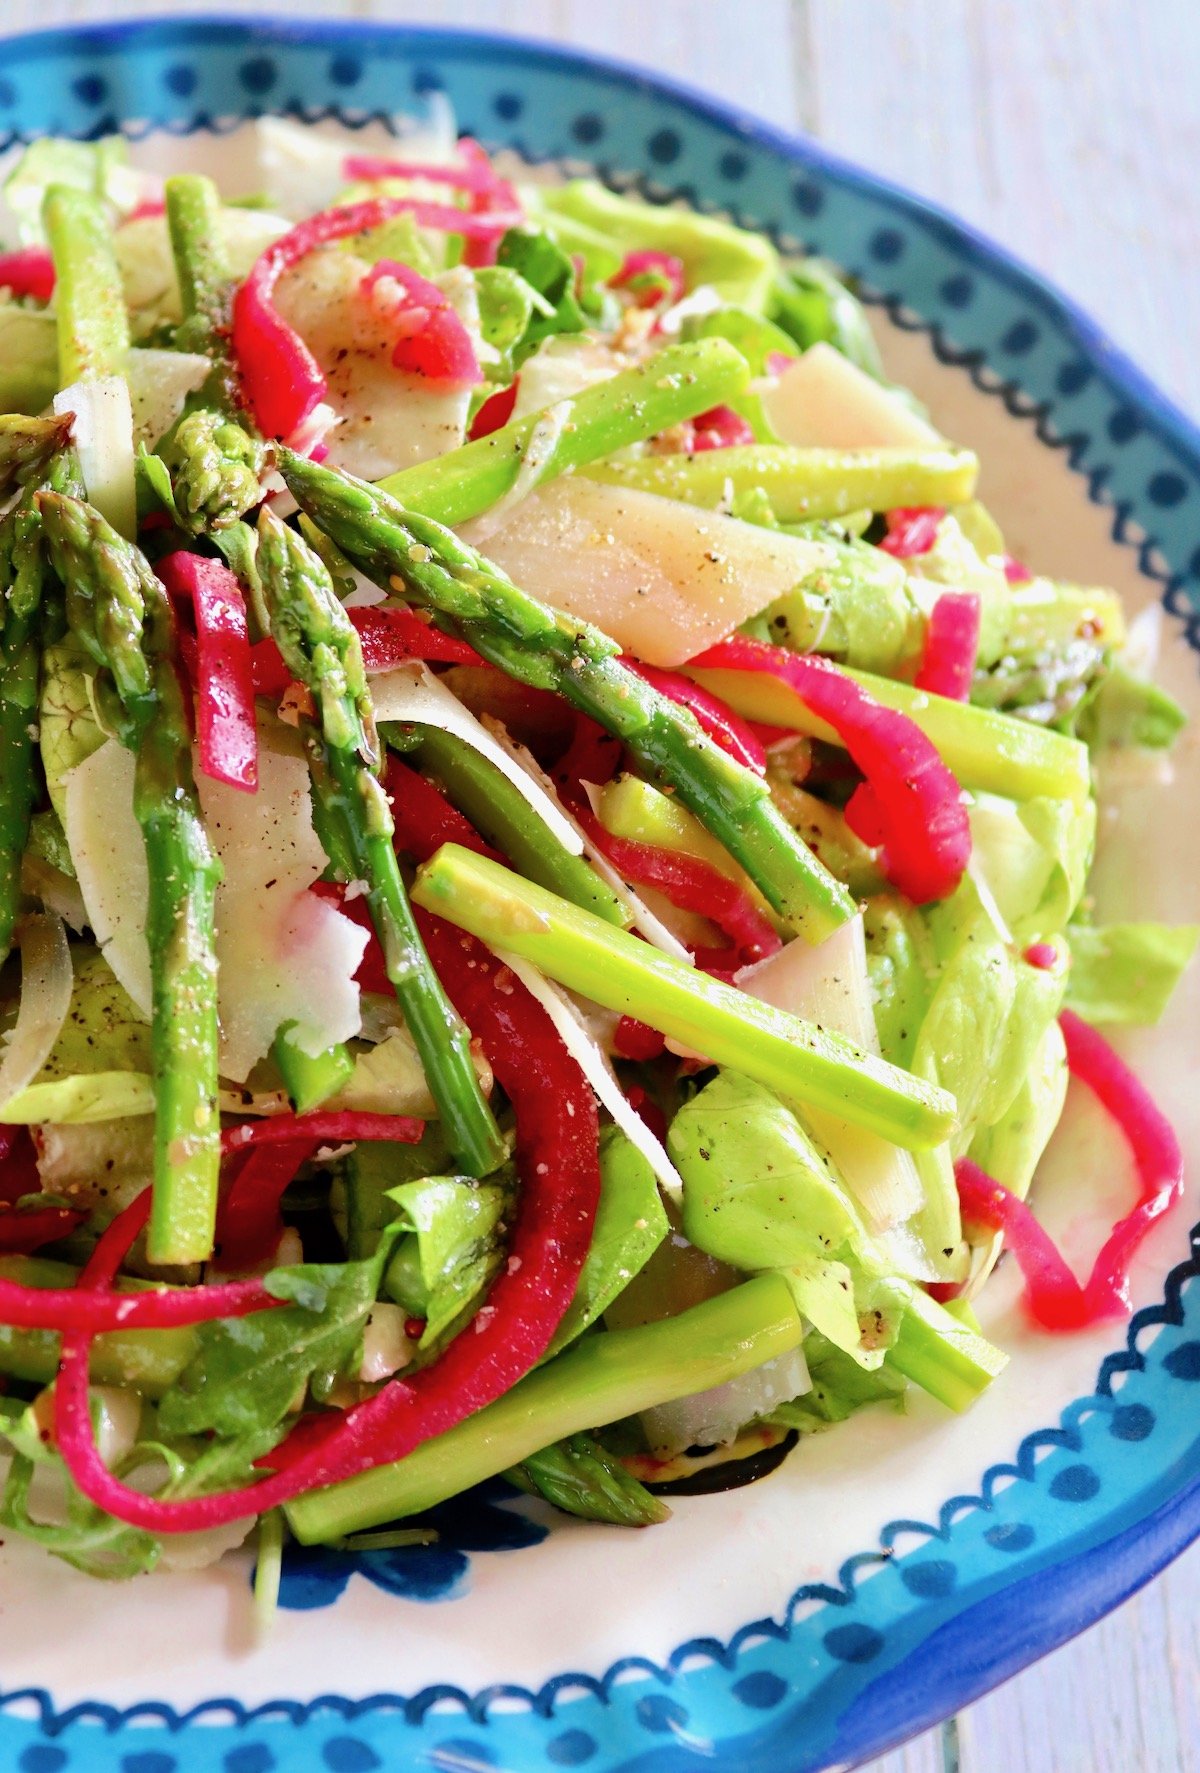 Blue-rimmed plate with asparagus salad and pickled red onions